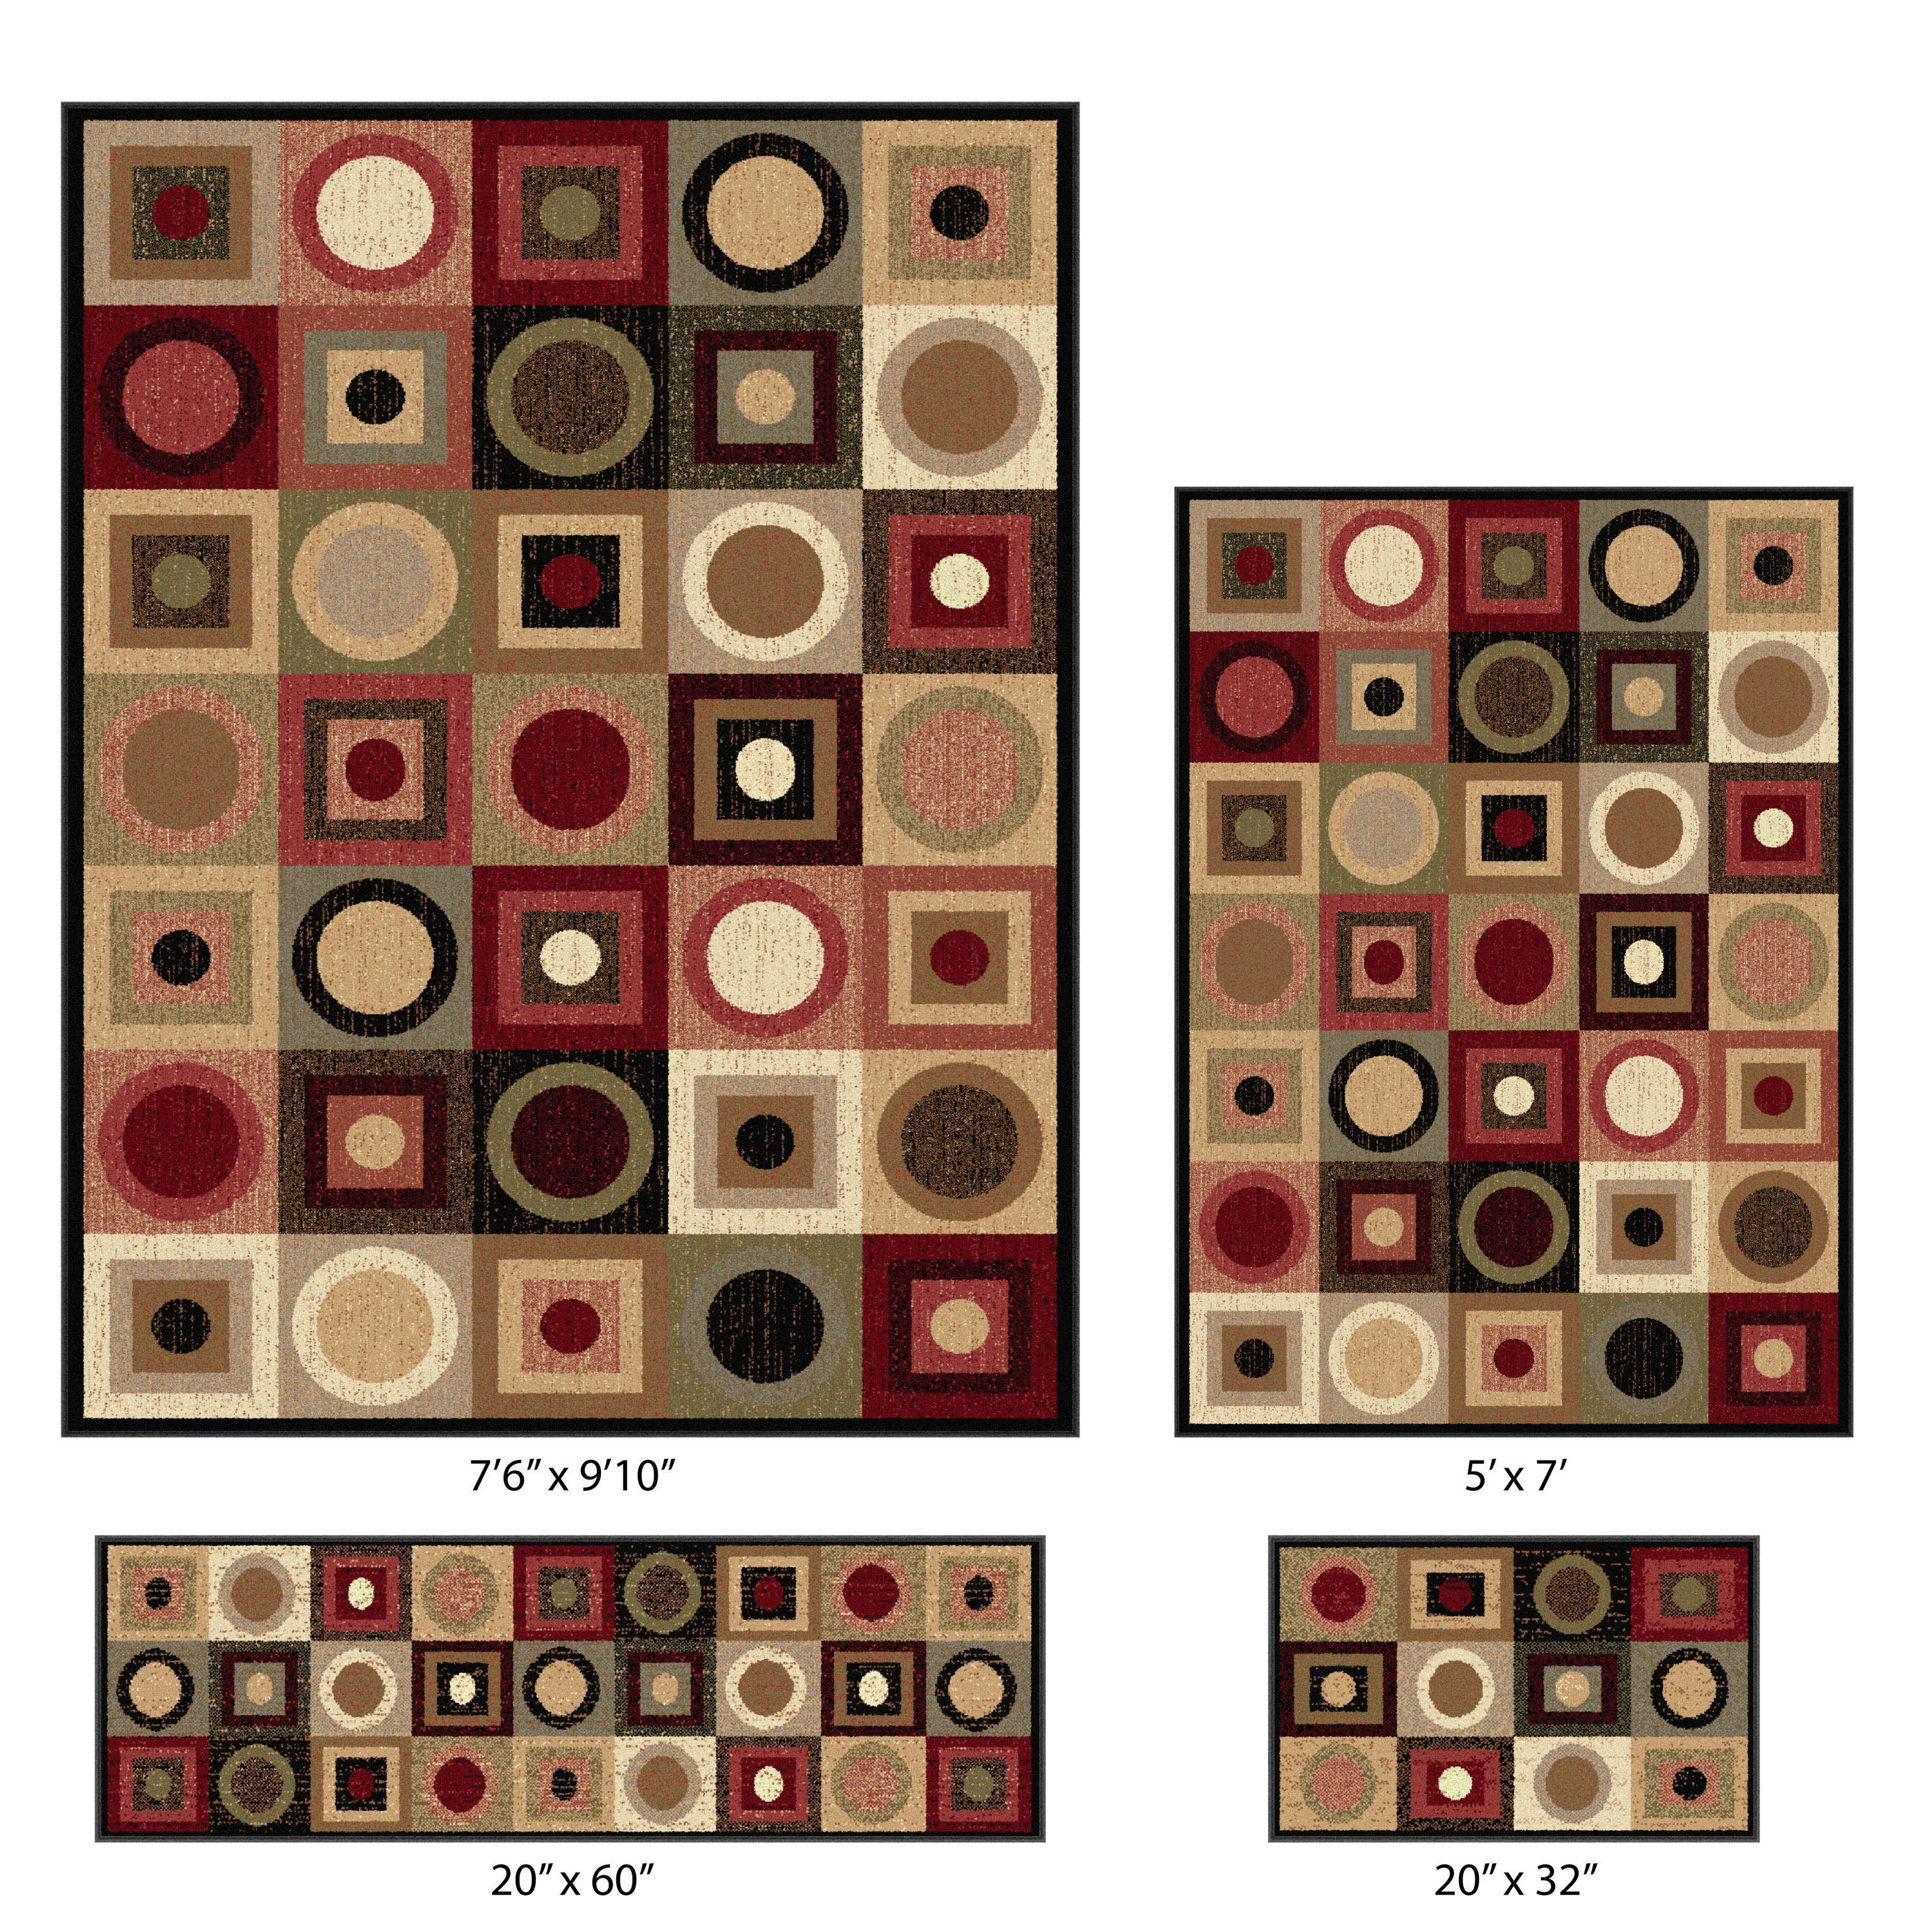 Elegance 4 piece Multi colored Contemporary Geometric Rug Set (MultiSecondary Colors Tan/ red/ blue/ green/ black Rug dimensions 76 x 910/ 5 x 7/ 2 x 5/ 2 x 3Tip We recommend the use of a non skid pad to keep the rug in place on smooth surfaces.All rug